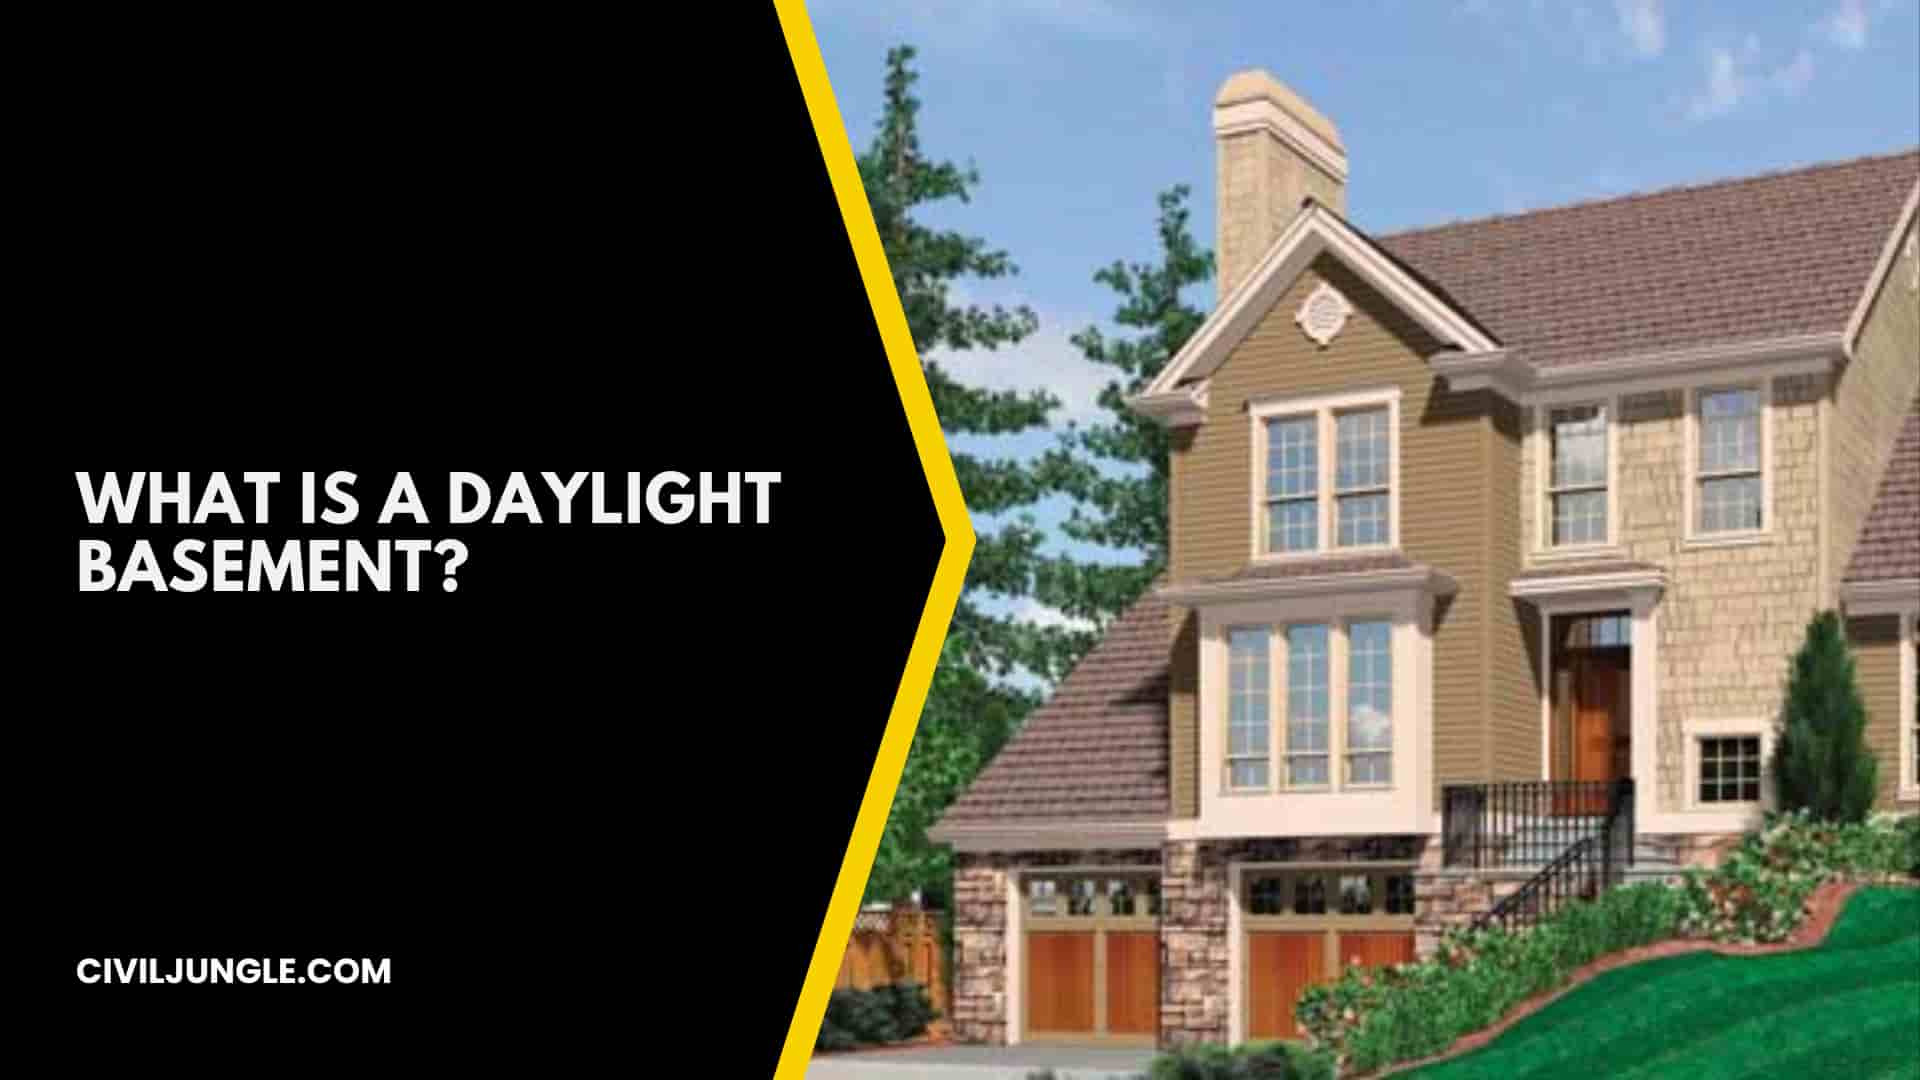 What Is a Daylight Basement?